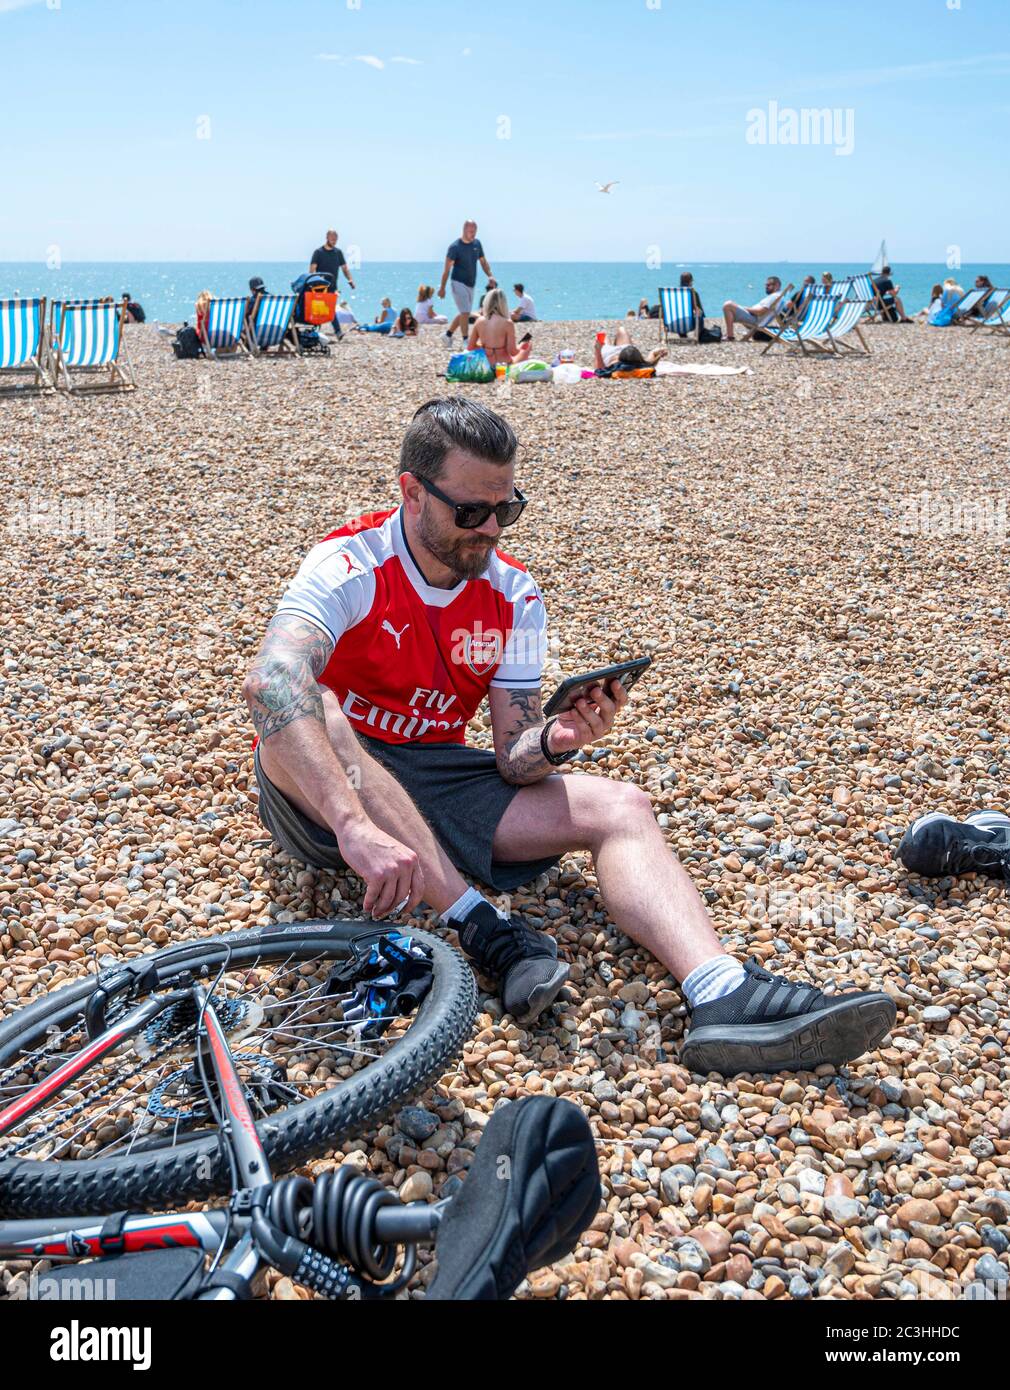 Brighton UK 20th June 2020 -   An Arsenal football fan tunes in his mobile phone on Brighton beach ready to watch the Premier League match against Brighton today during the coronavirus COVID-19 pandemic crisis . All the matches are  being played behind closed doors because of the lockdown restrictions   : Credit Simon Dack / Alamy Live News Stock Photo